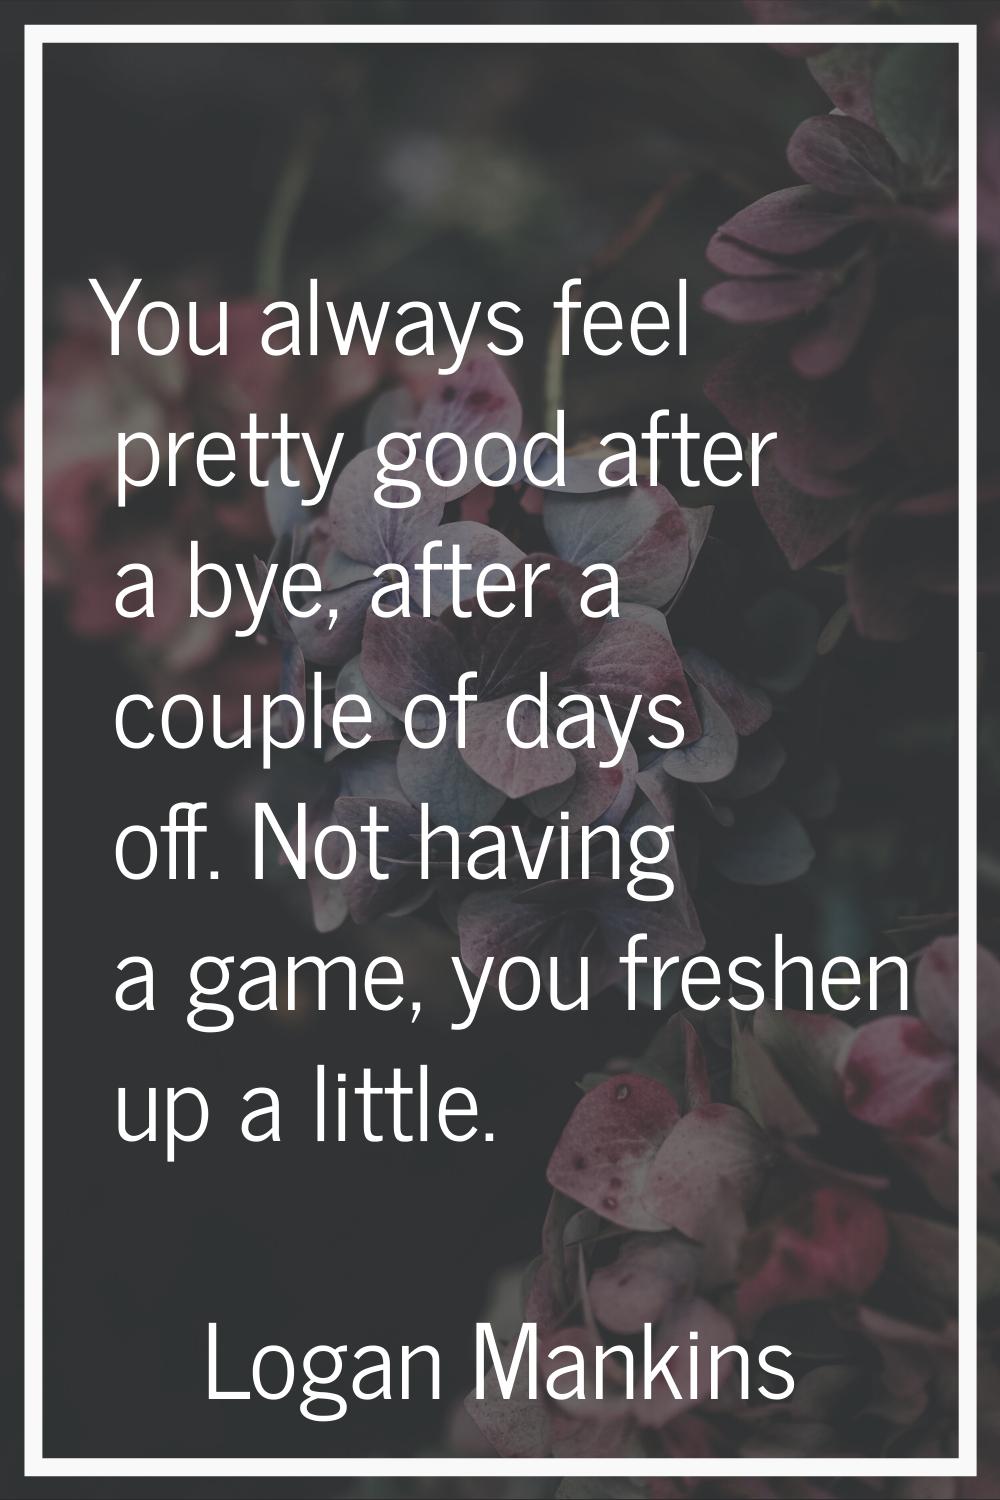 You always feel pretty good after a bye, after a couple of days off. Not having a game, you freshen